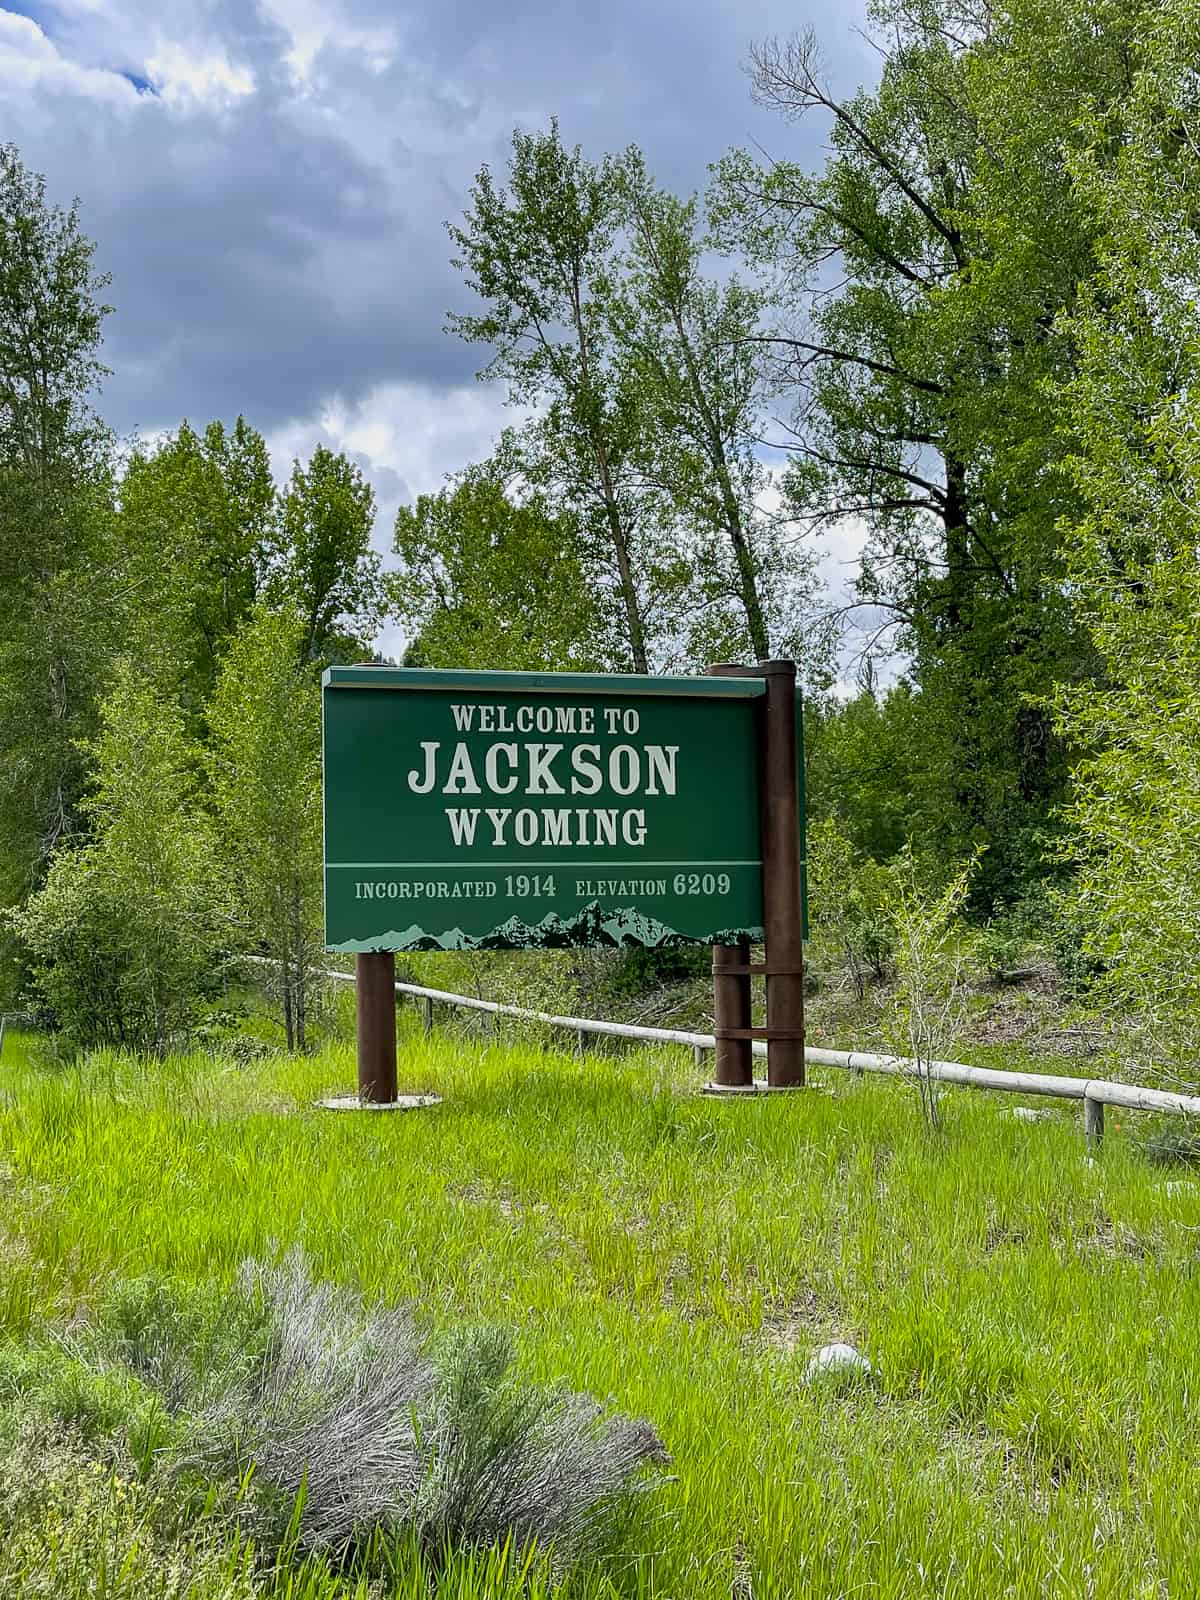 A sign for Jackson Wyoming.